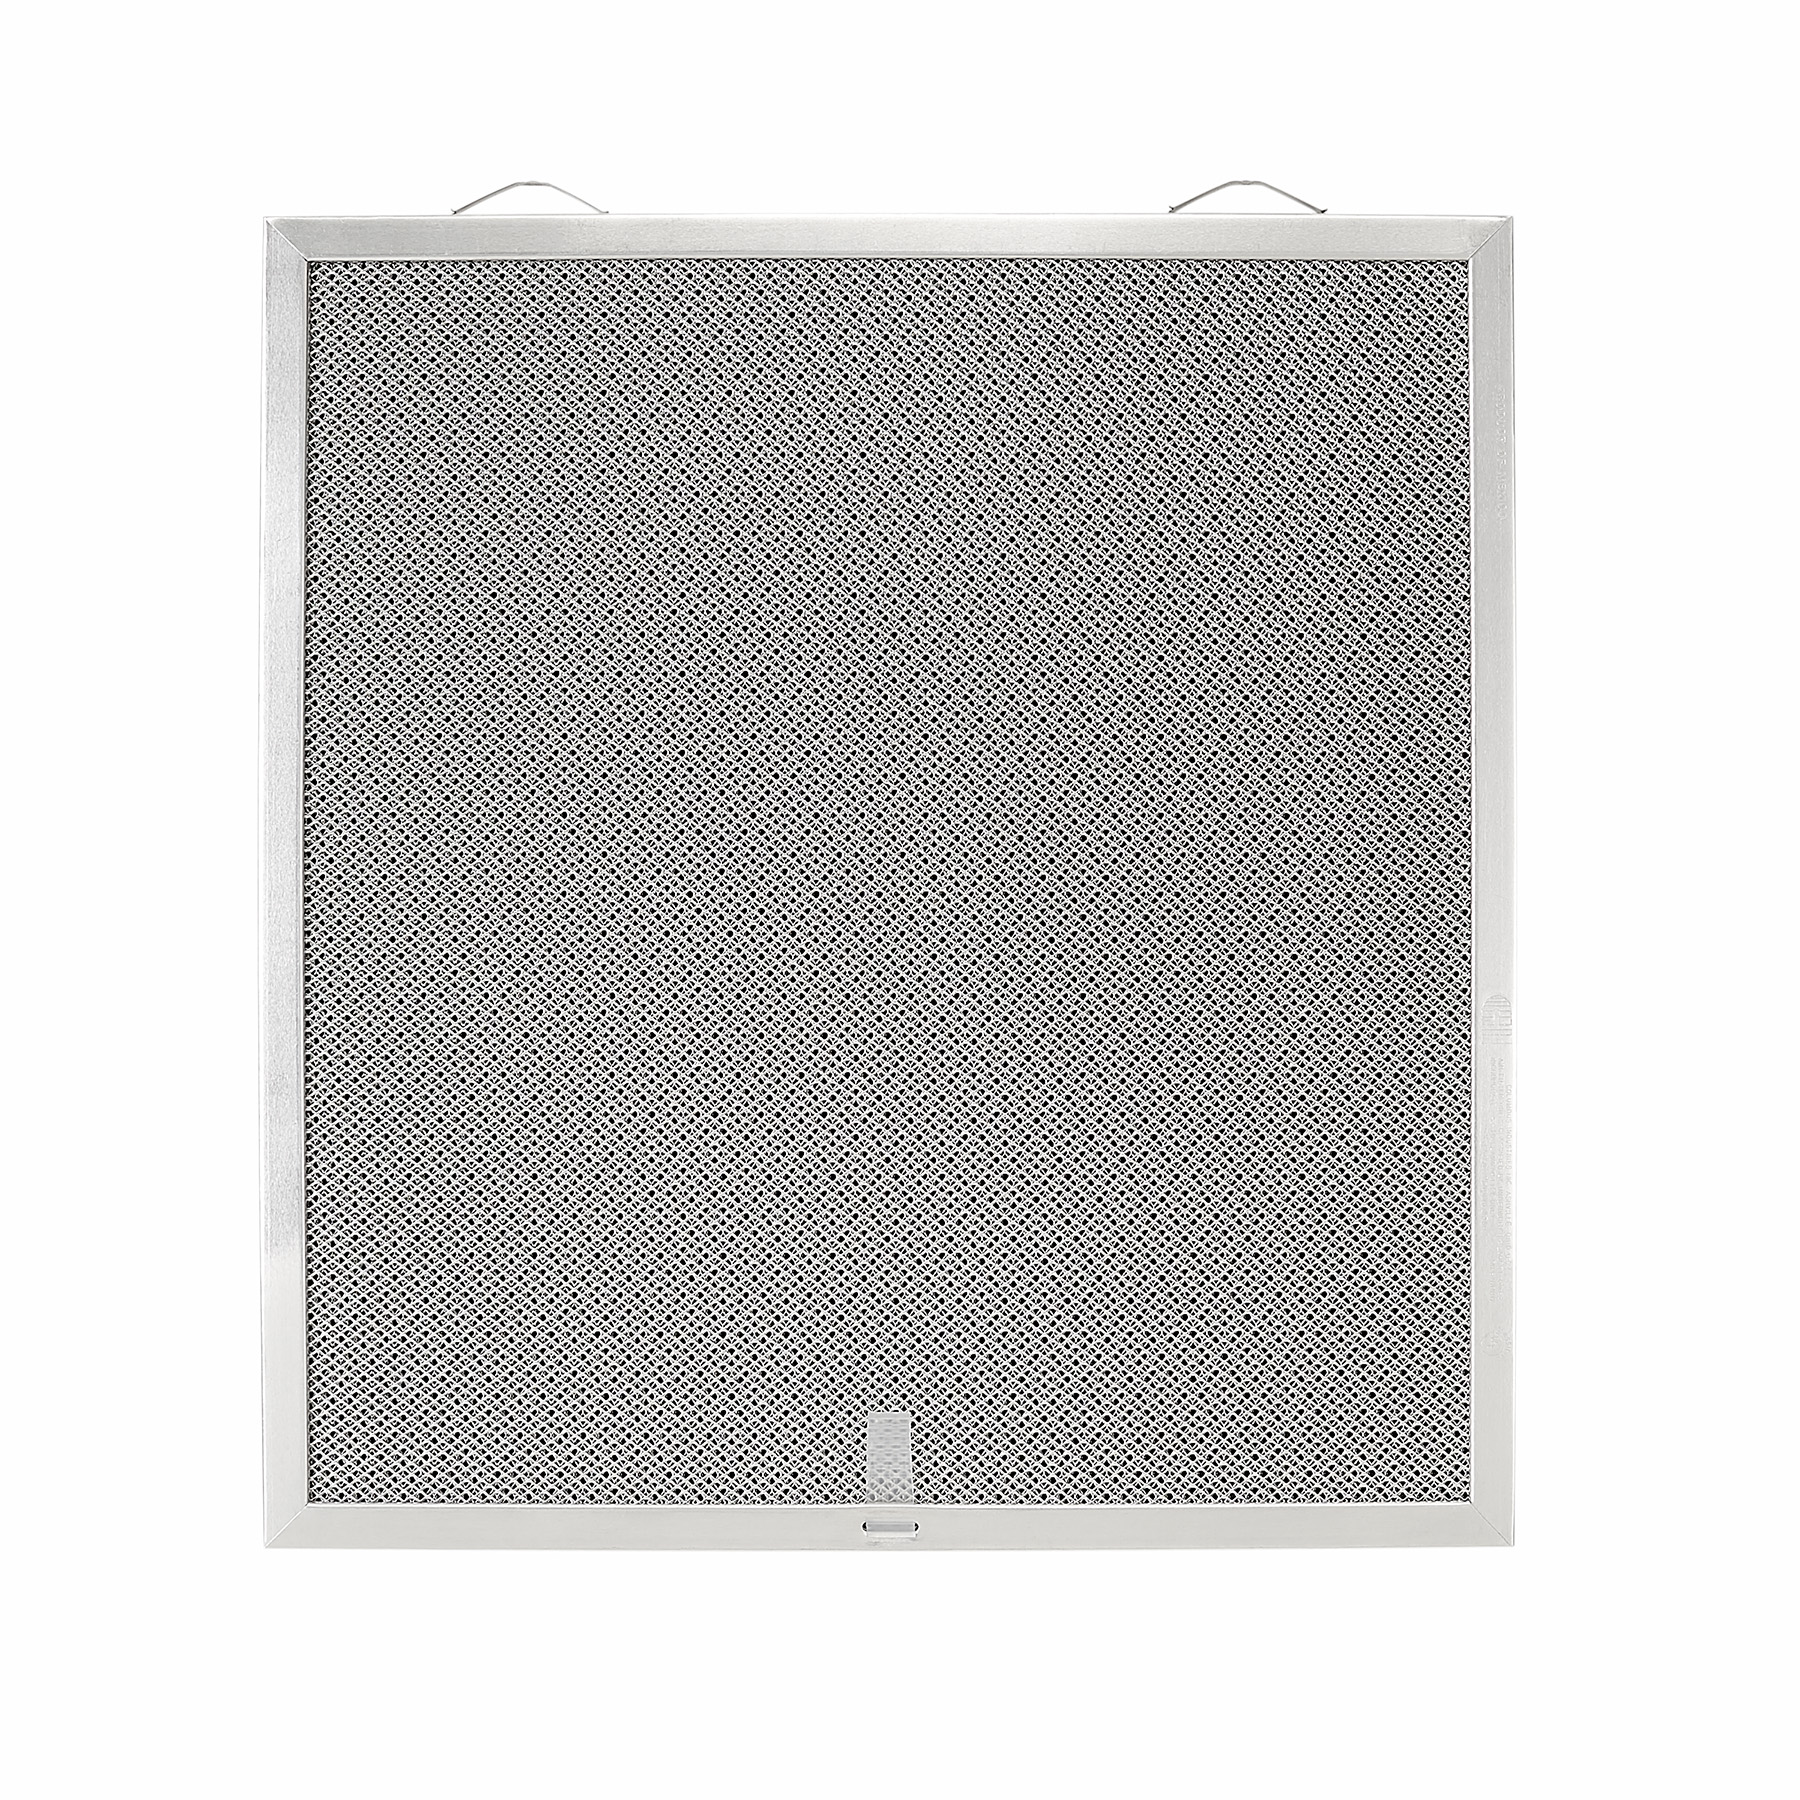 Broan-NuTone® Genuine Replacement Charcoal Filter for Range Hoods, 12-7/8" x 13-3/4", Fits Select Models